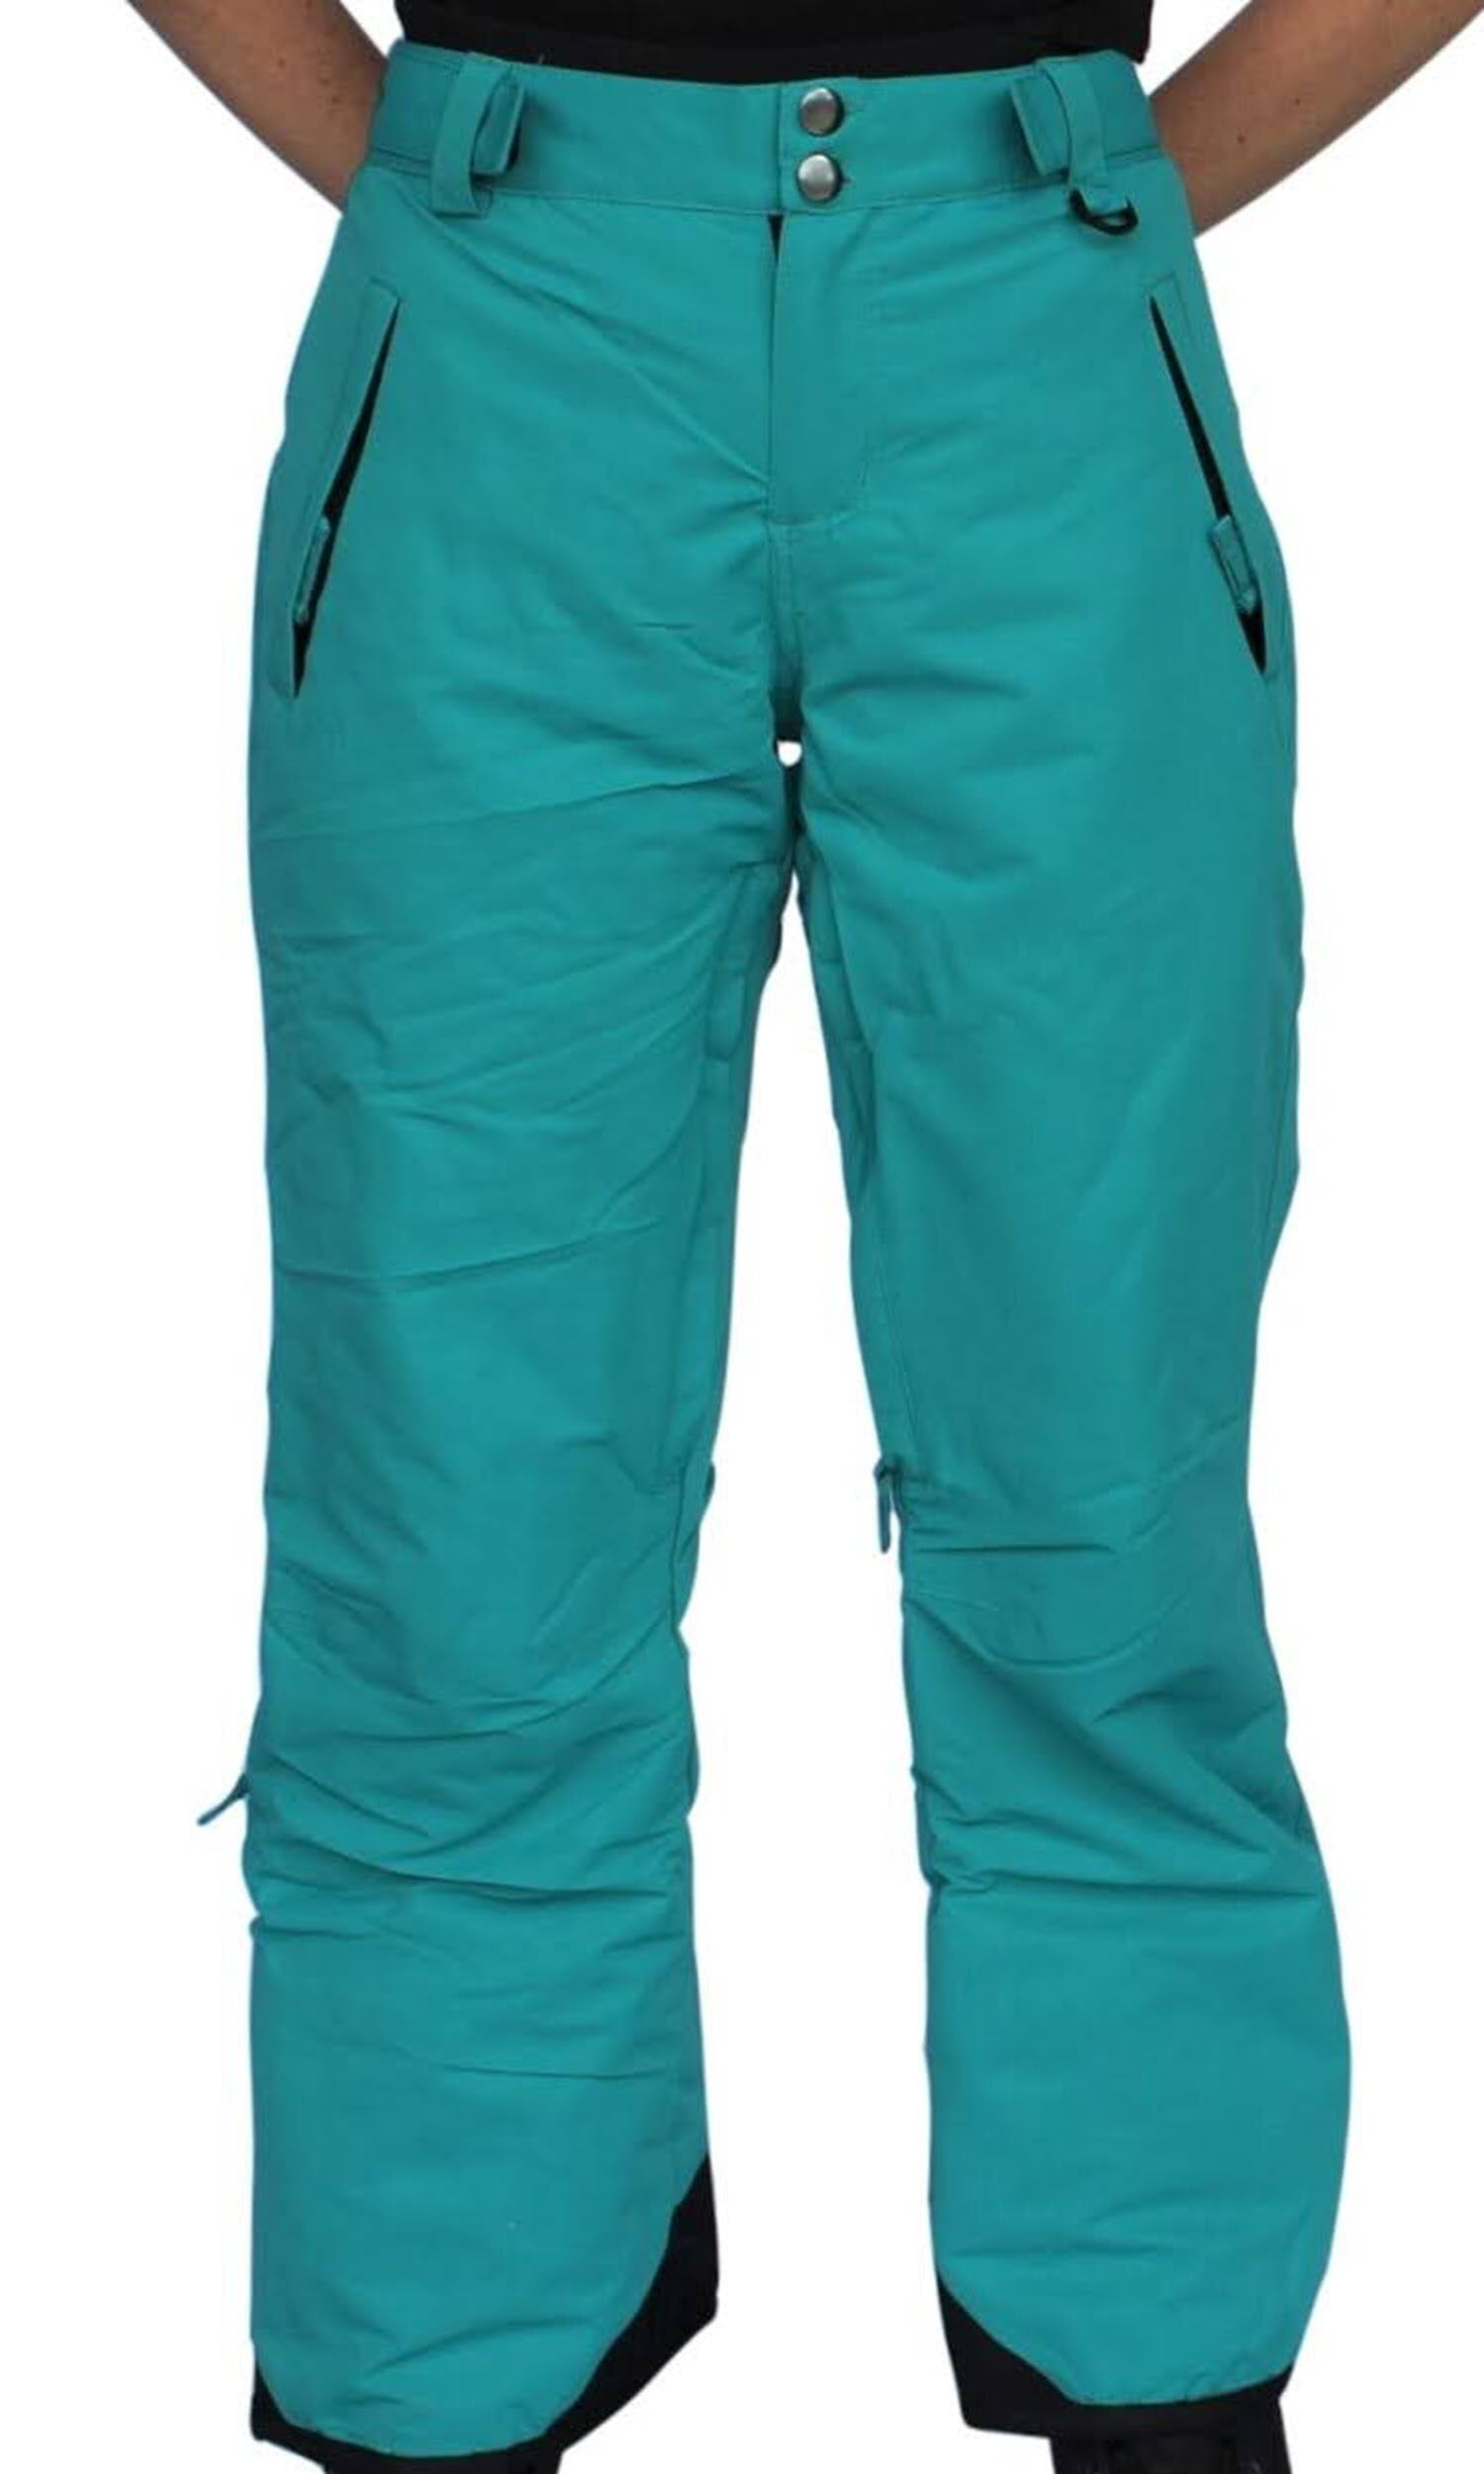 Snow Country Women's Insulated Ski Pants, Teal, XL Short